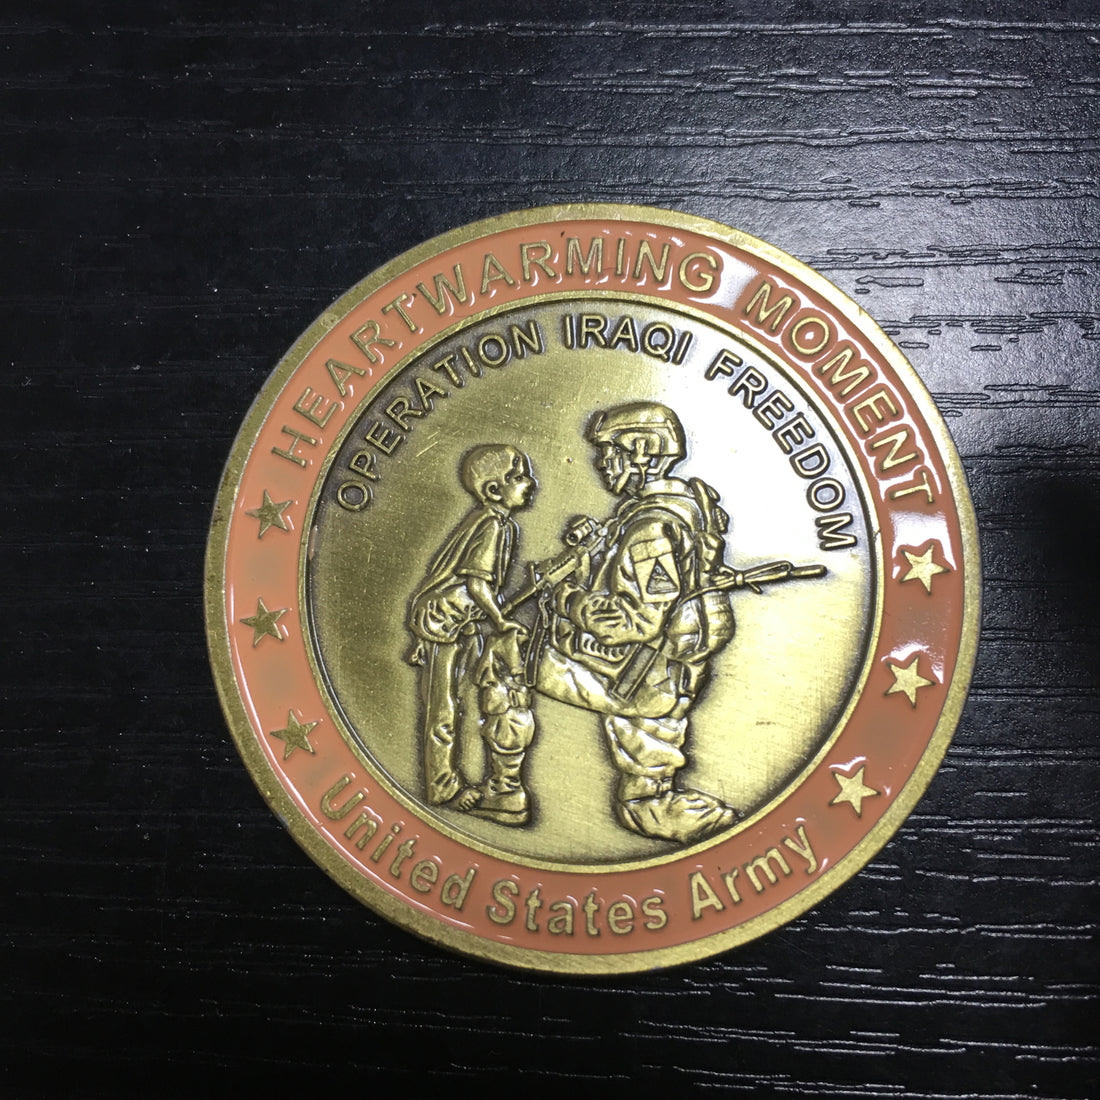 Challenge coin of Saint George pray for us, Operation Iraqi Freedom, Heartwarming Moment